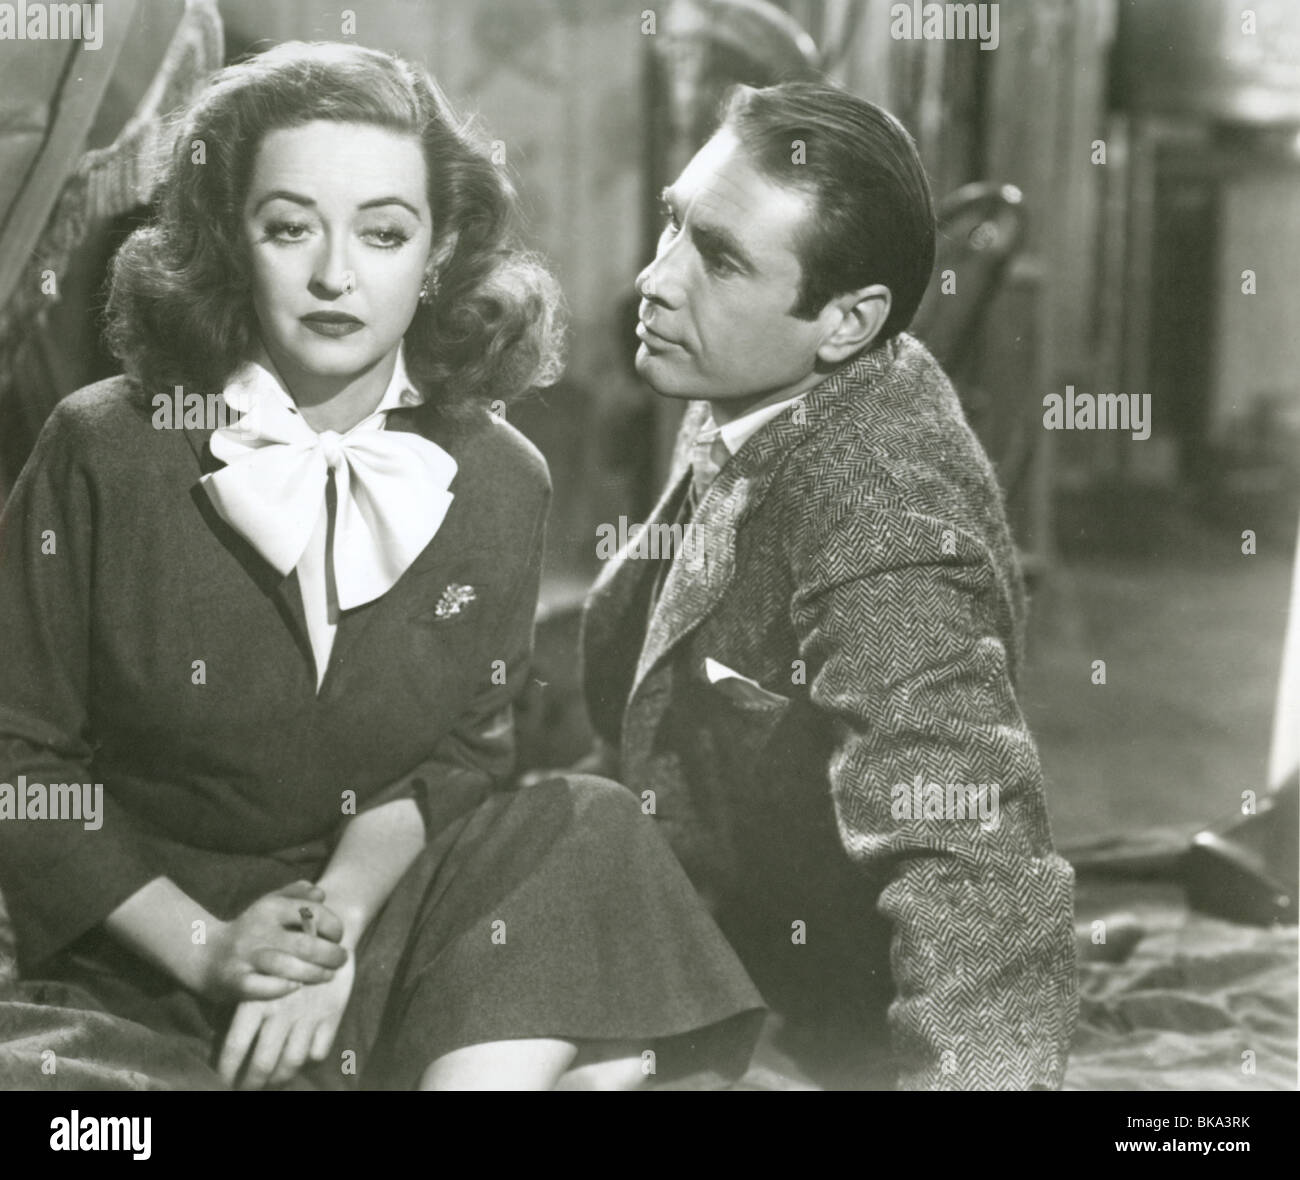 ALL ABOUT EVE (1950) BETTE DAVIS, GARY MERRILL AAE 015P Foto Stock